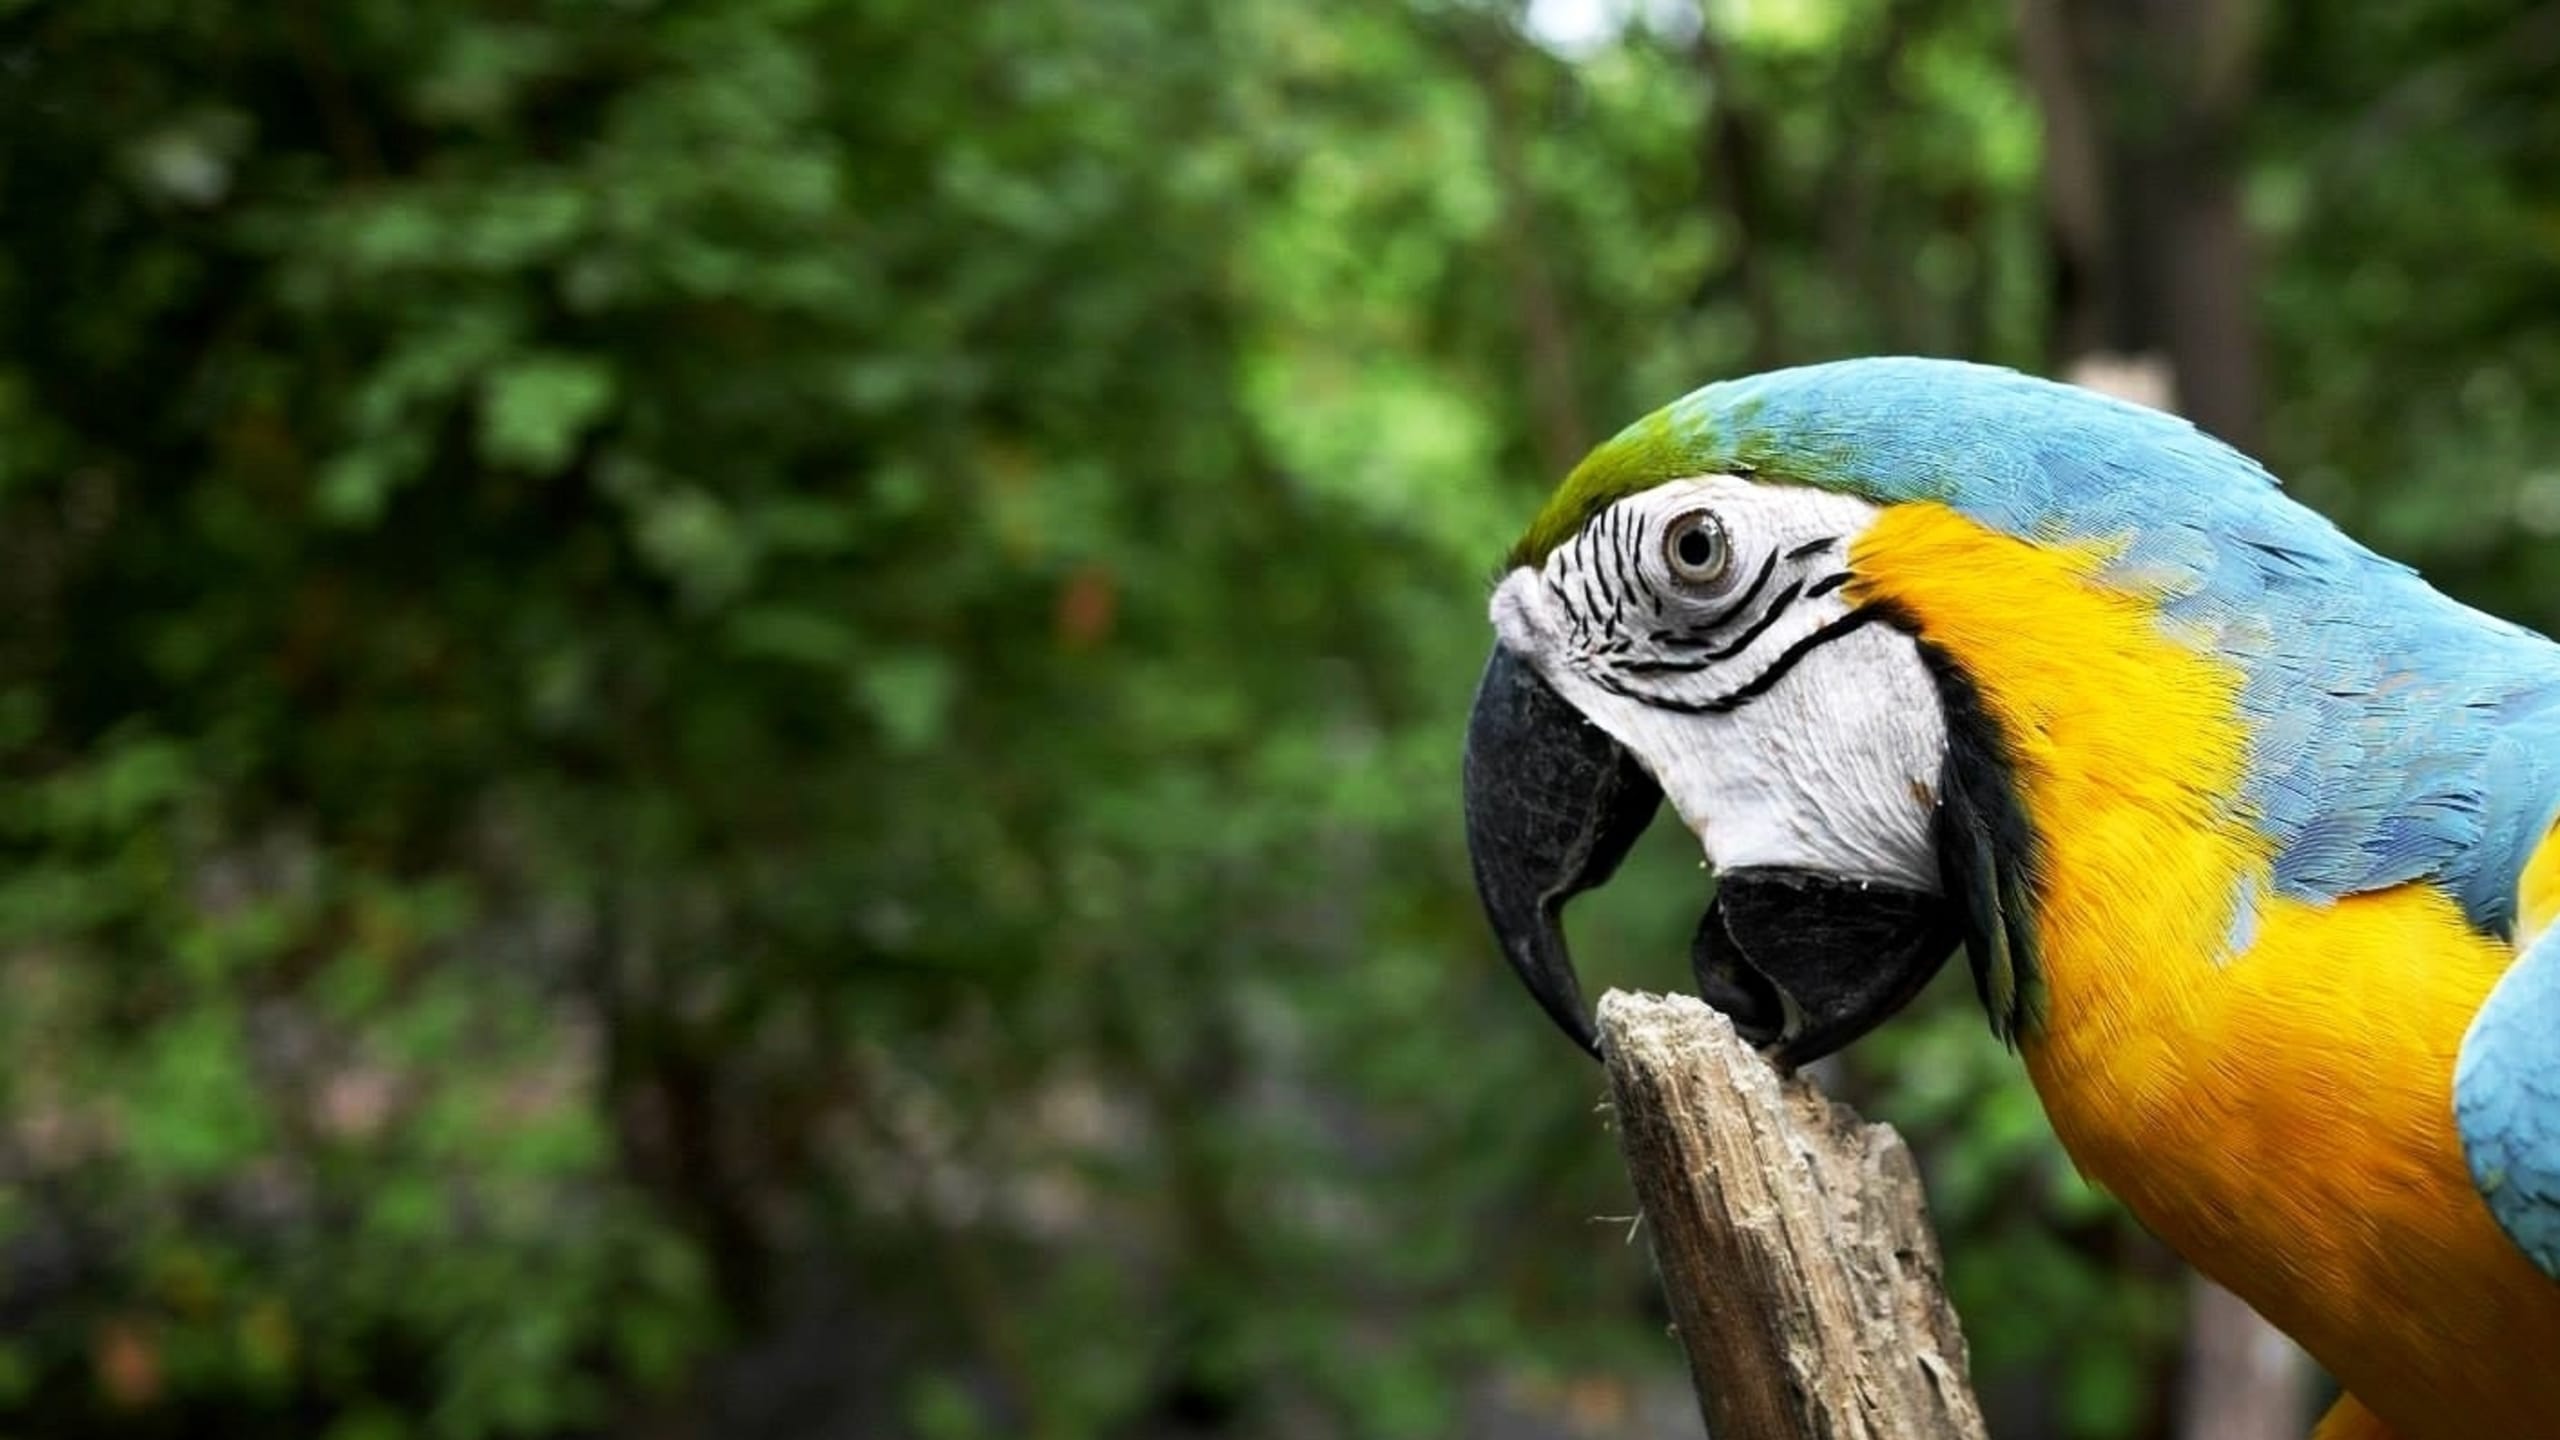 Macaw in a forest, biting a dry log.